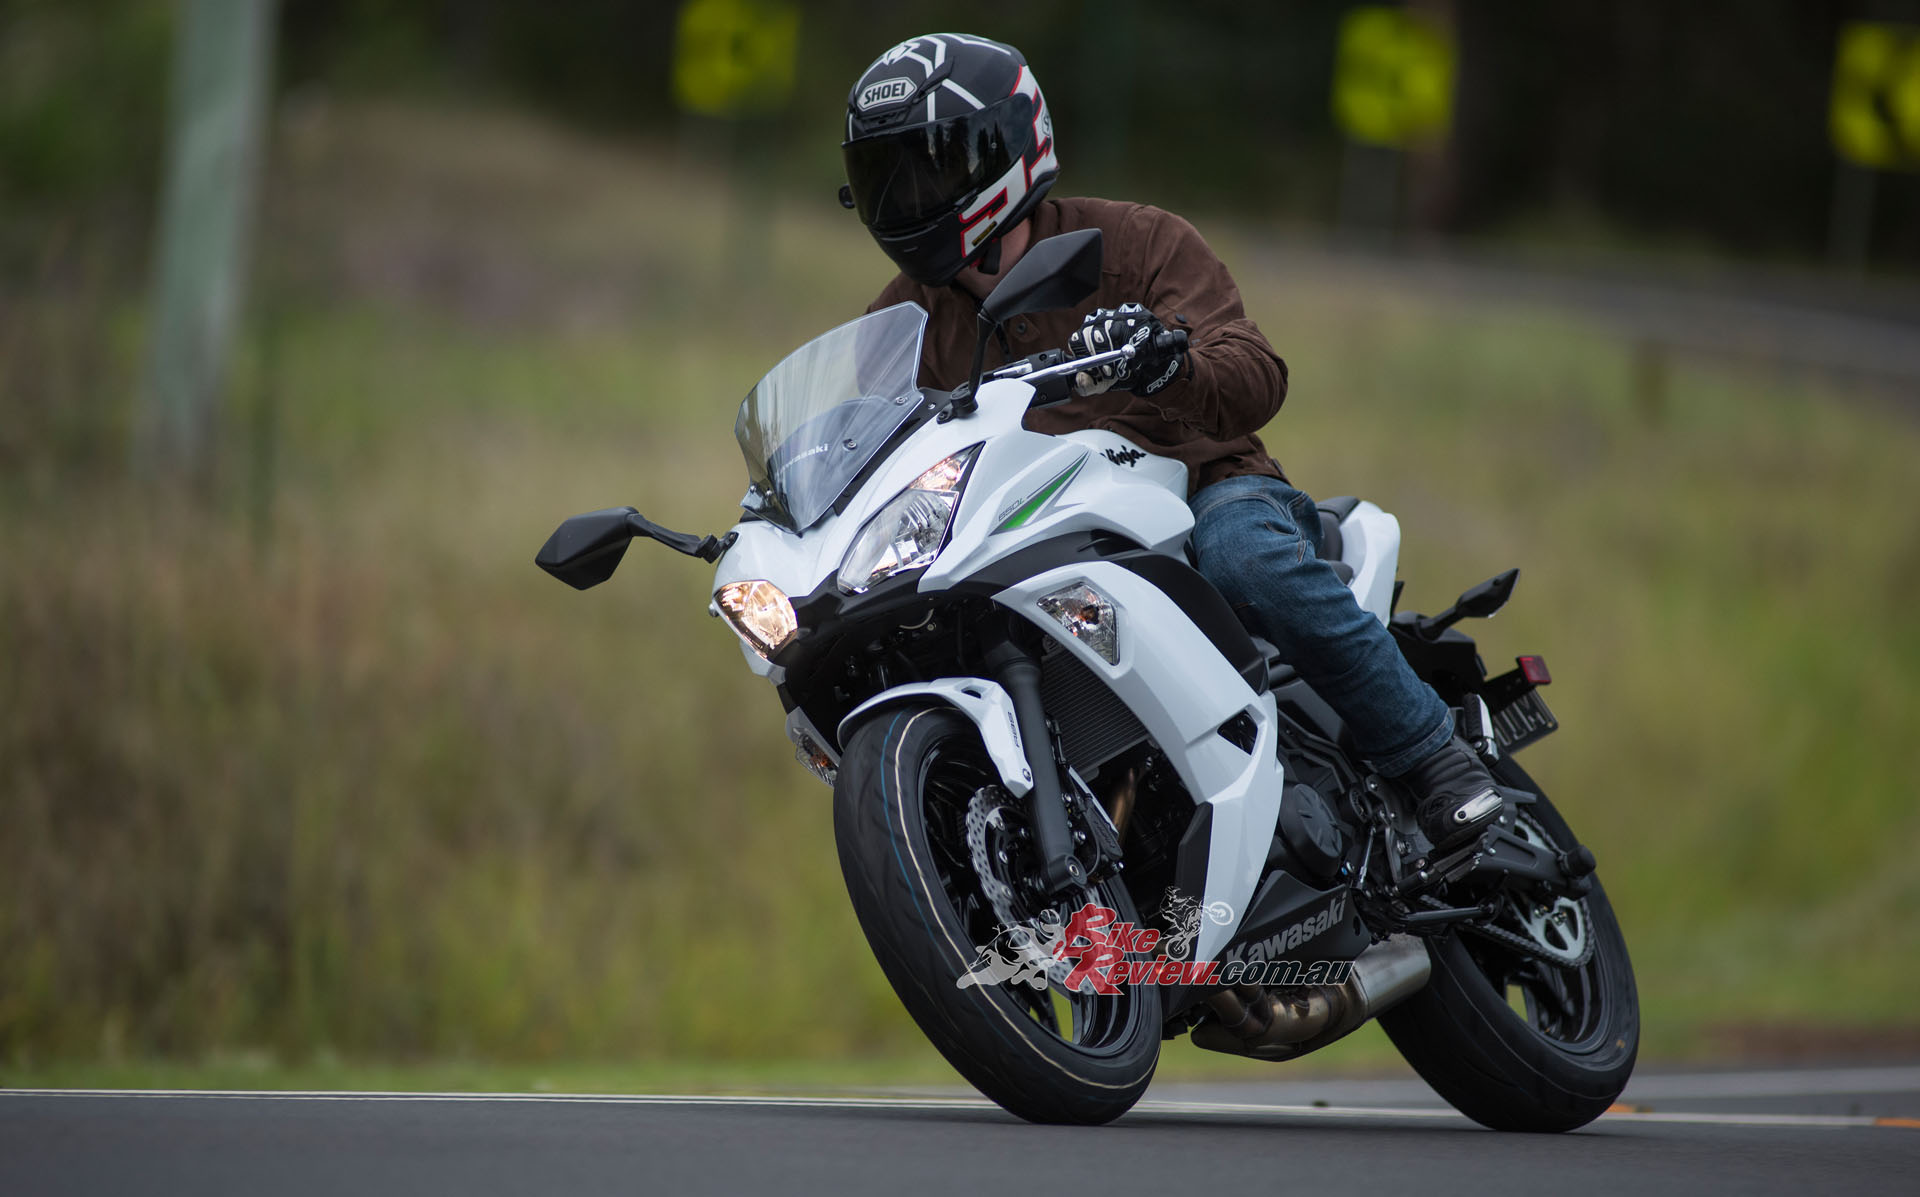 The Ninja 650L features ABS, slipper clutch and an all-new frame and swingarm saving a huge amount of weight over the previous model. This package has made the bike a really sweet handler. 